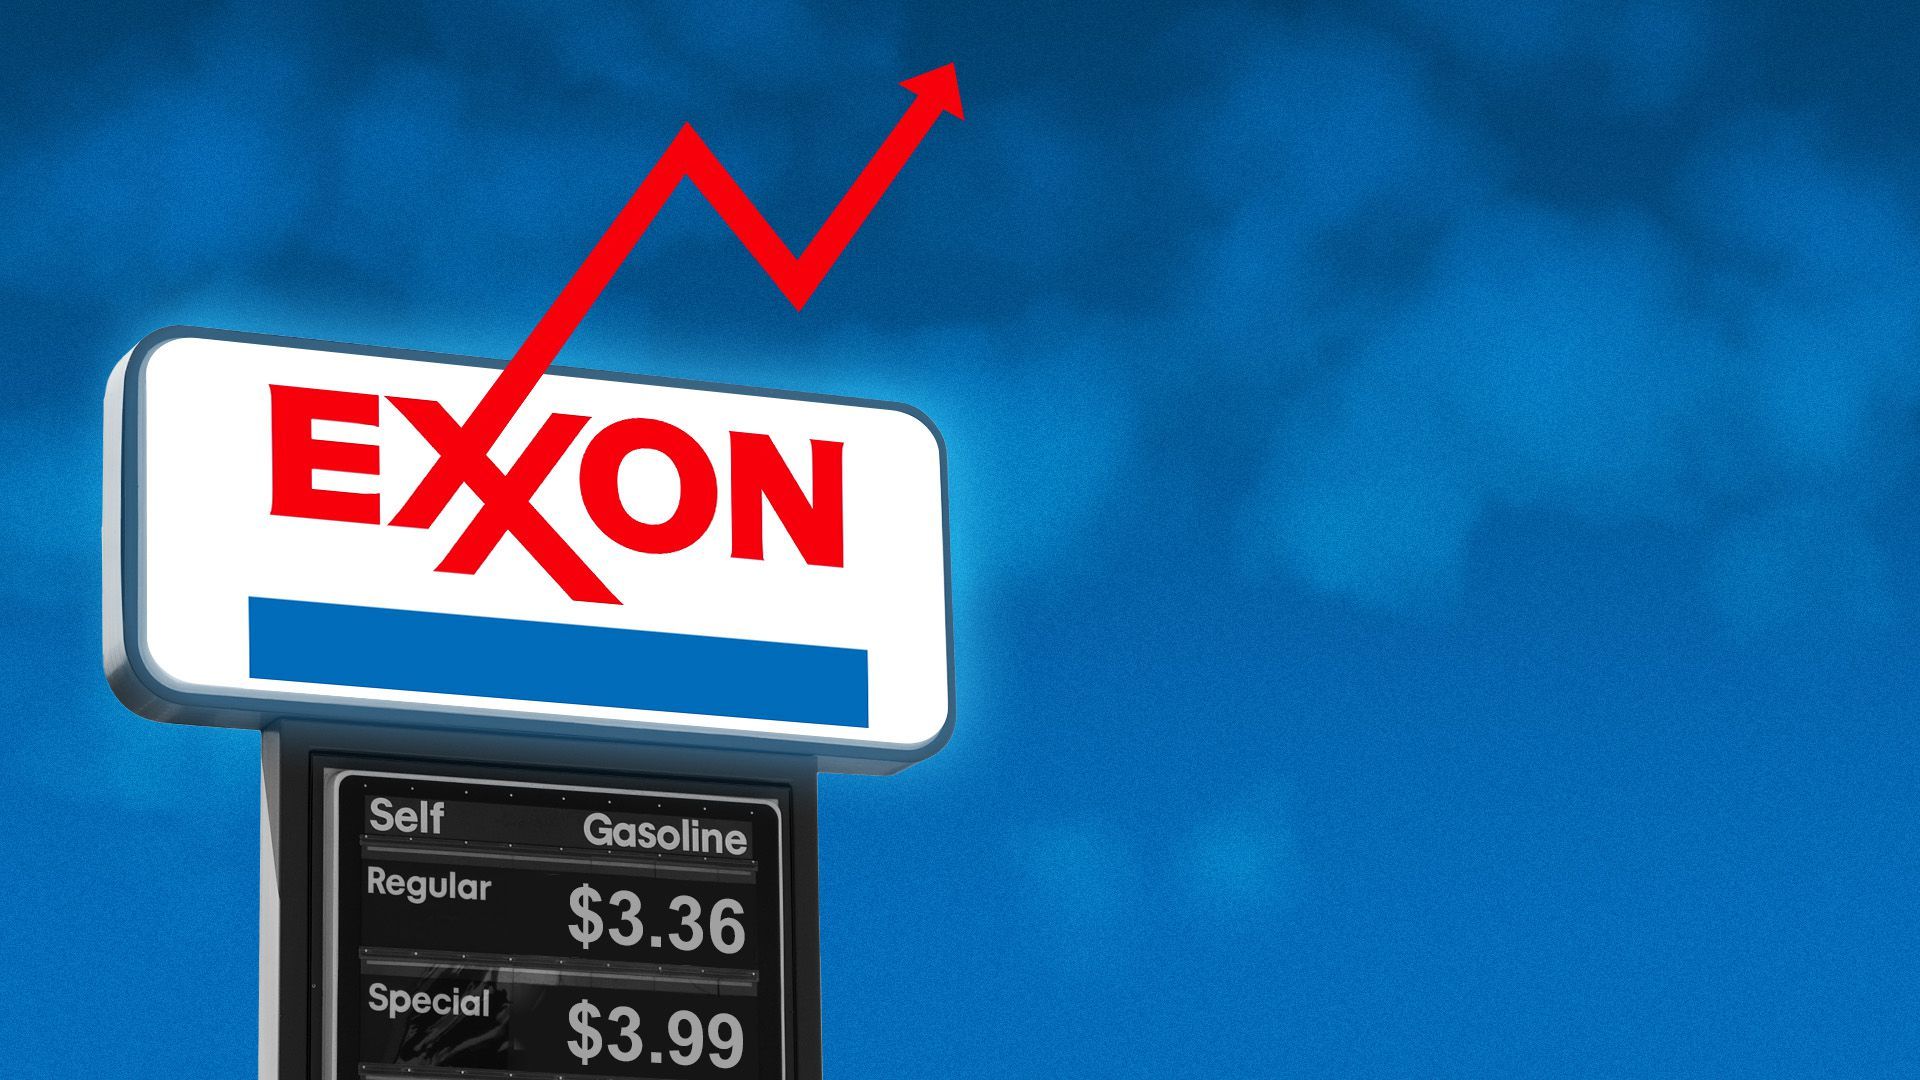 Illustration of an exxon sign with one of the x's forming an arrow going upwards